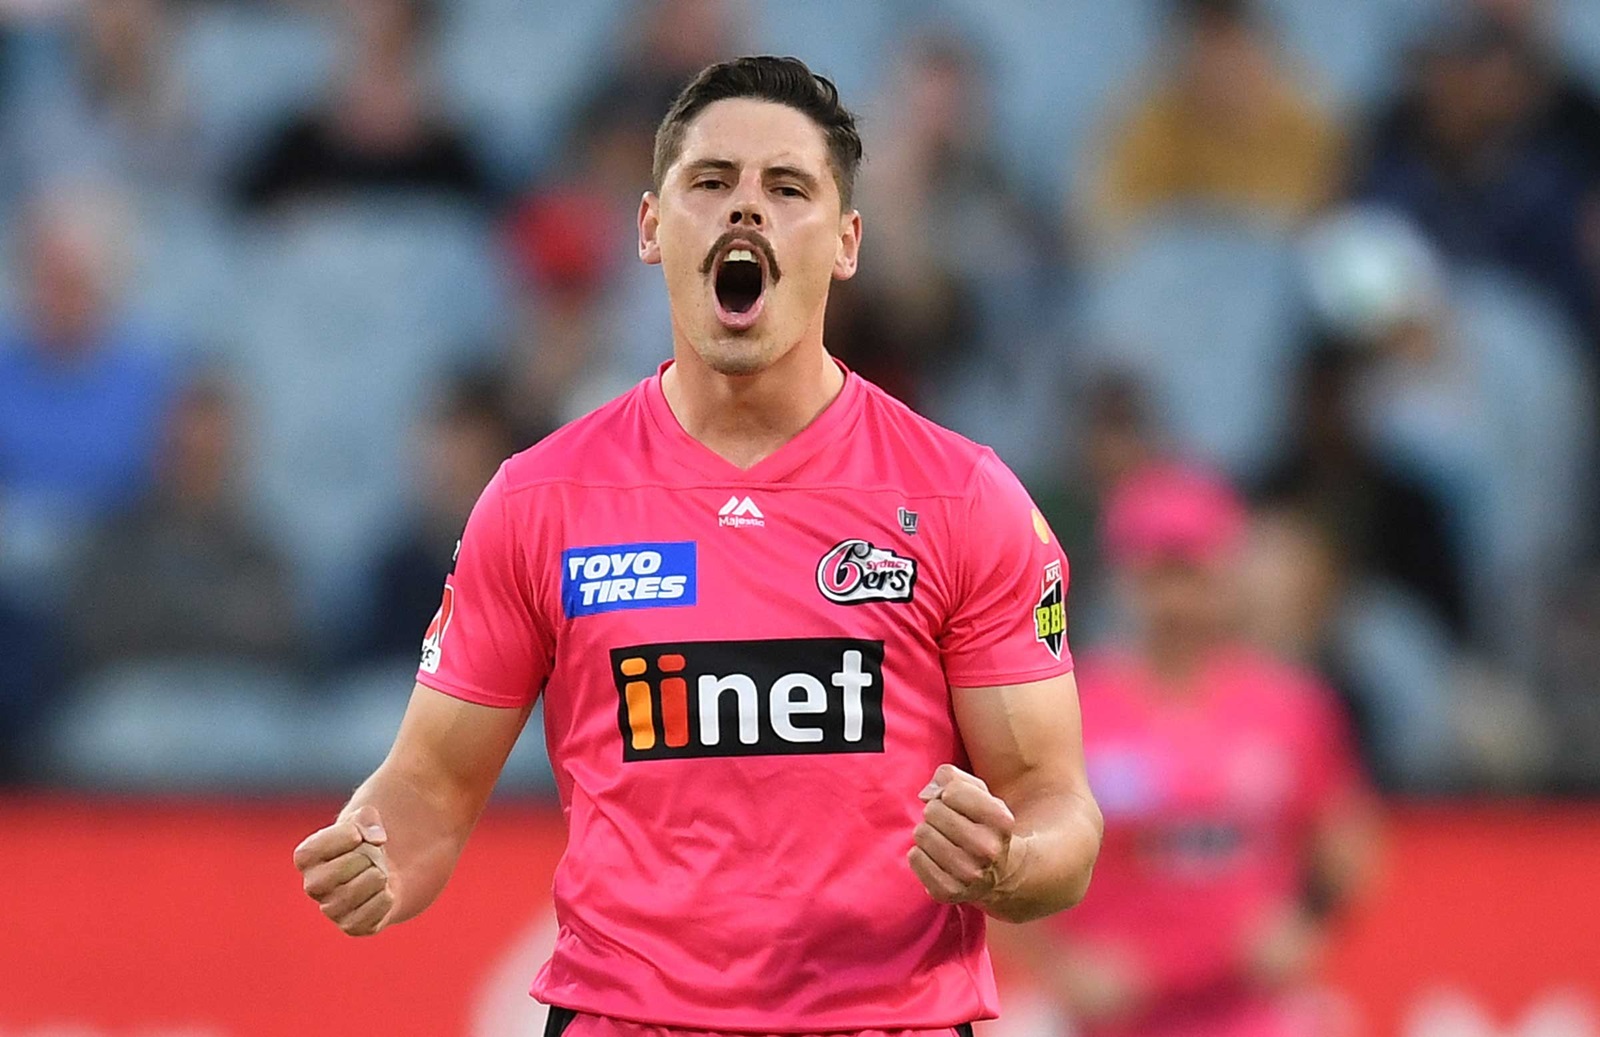 IPL 2021 | Delhi Capitals rope in Ben Dwarshuis as replacement for Chris Woakes